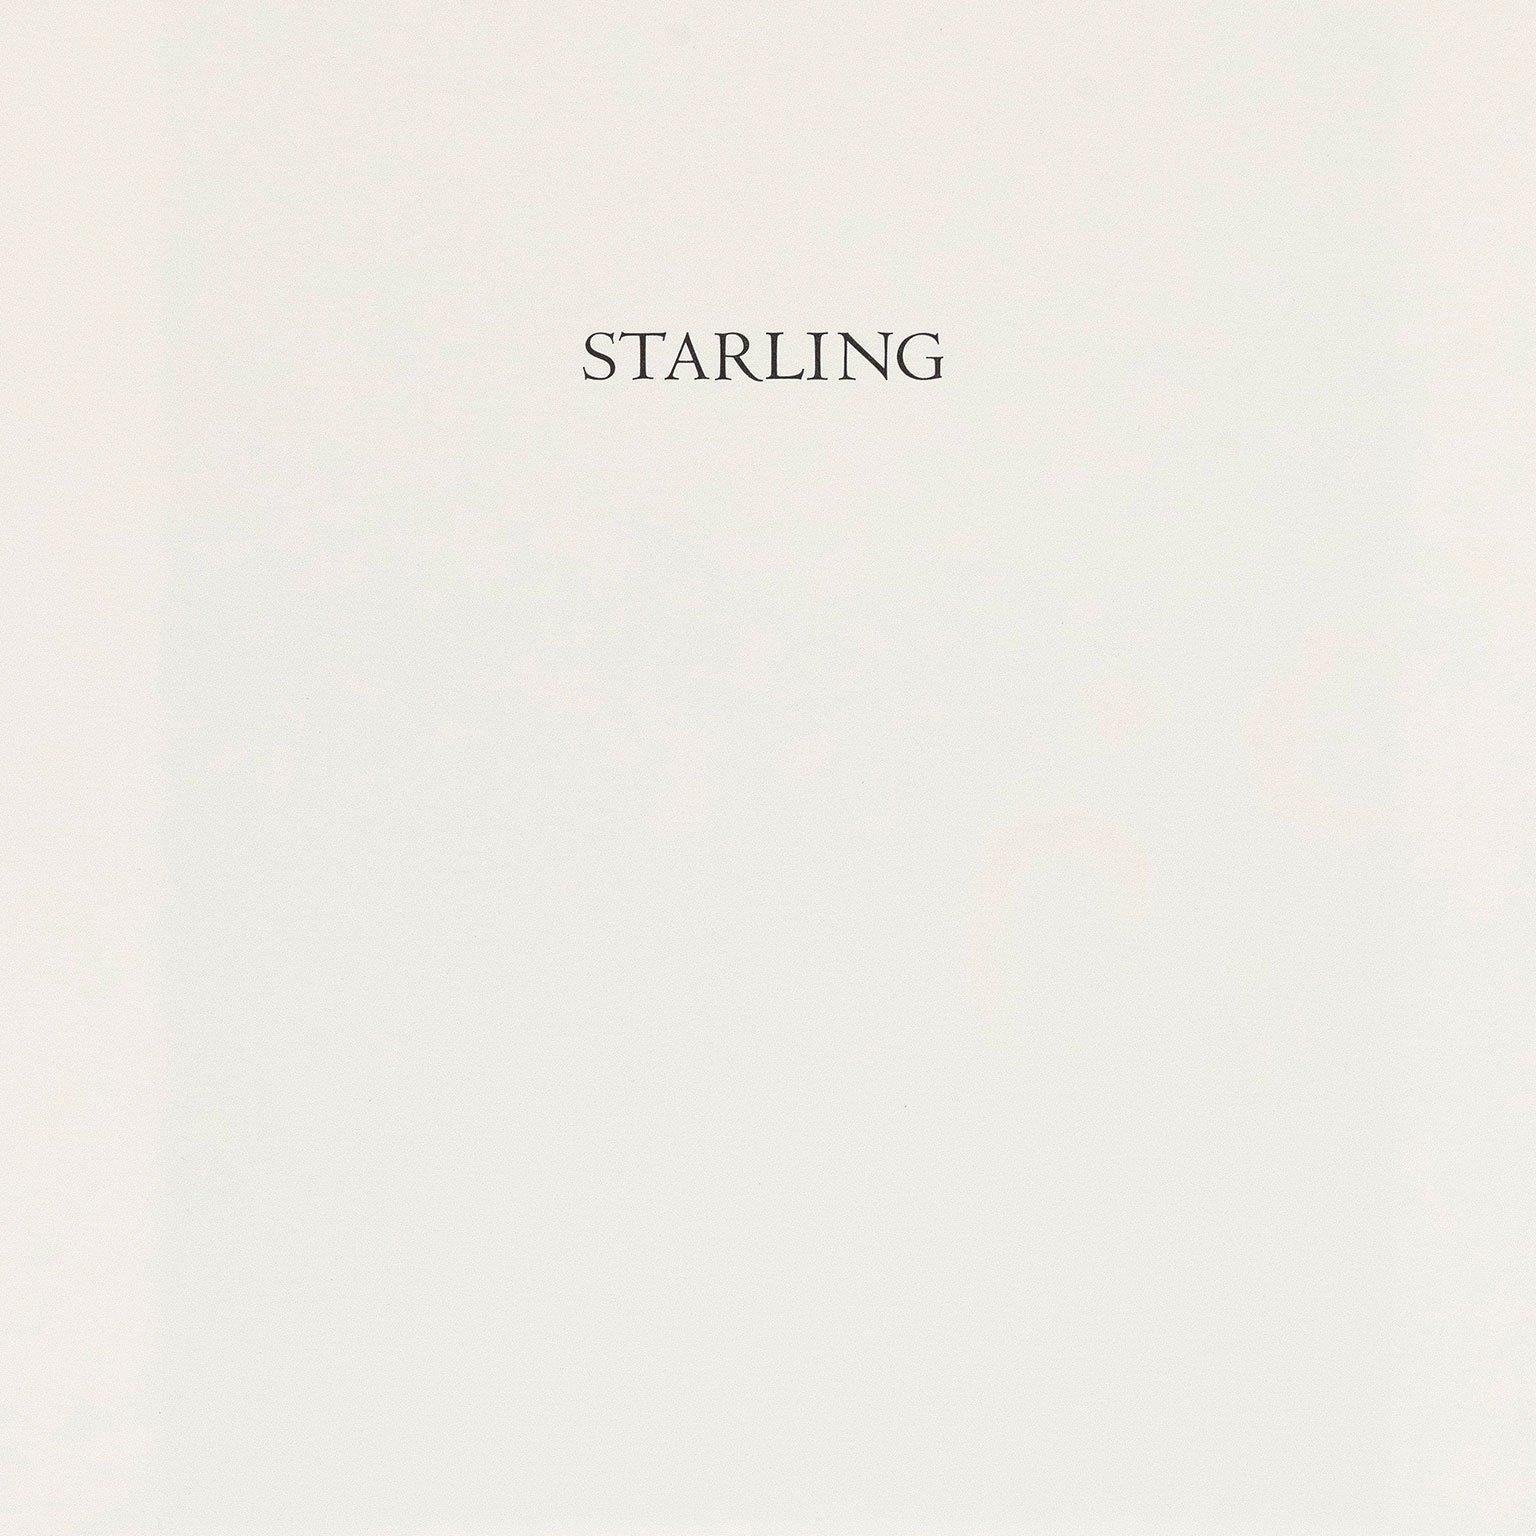 Starling (From artist book A Bestiary by Bradford Morrow)  - Abstract Print by James Nares